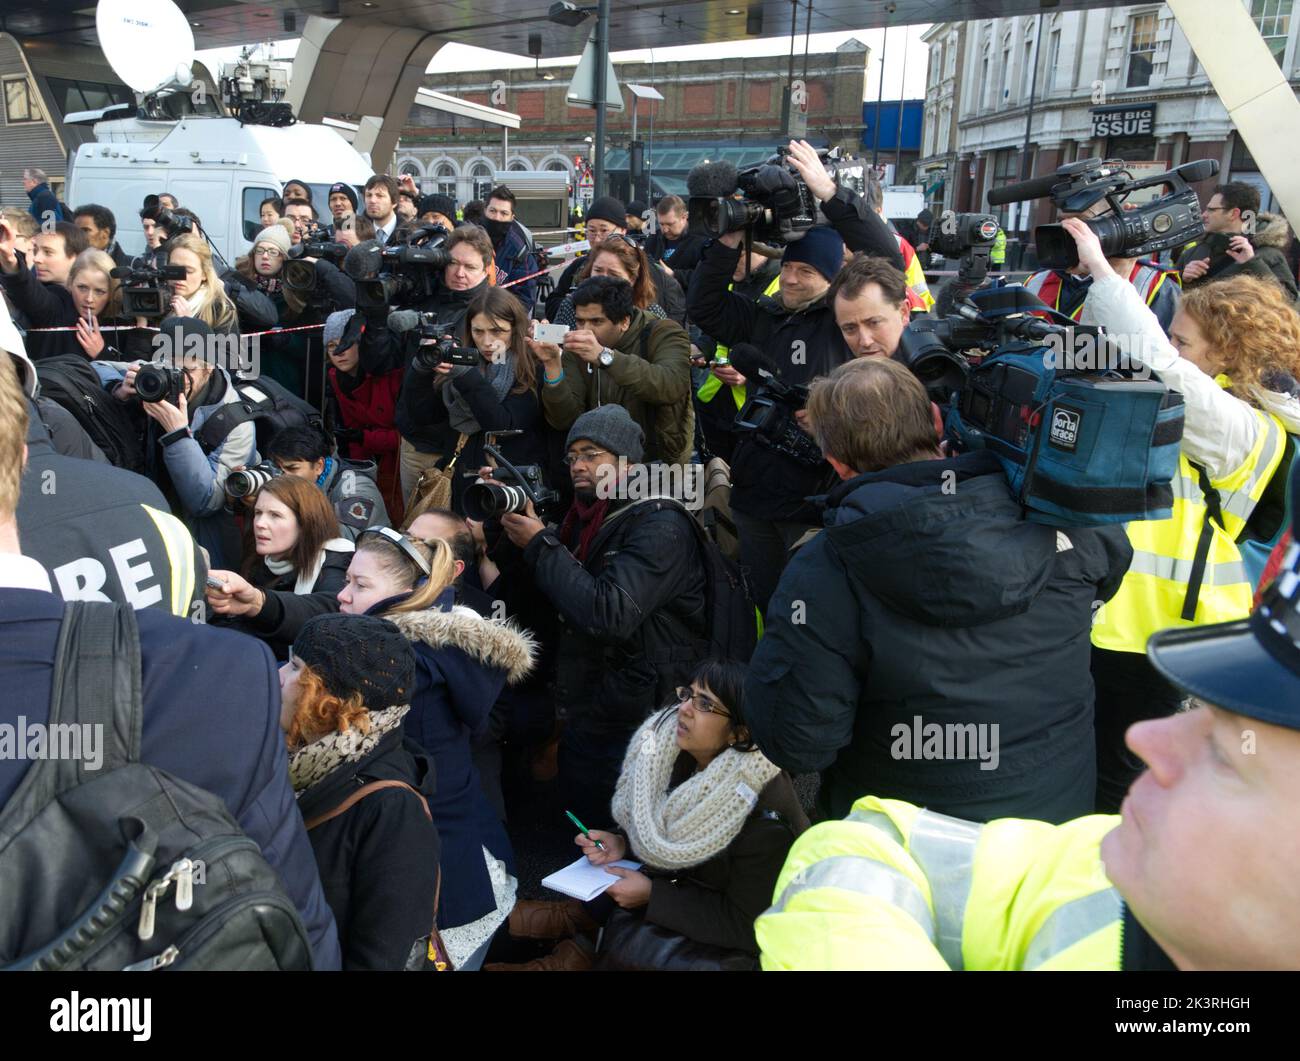 News media photographers, journalists and video crews at a press conference in London following an incident. Stock Photo